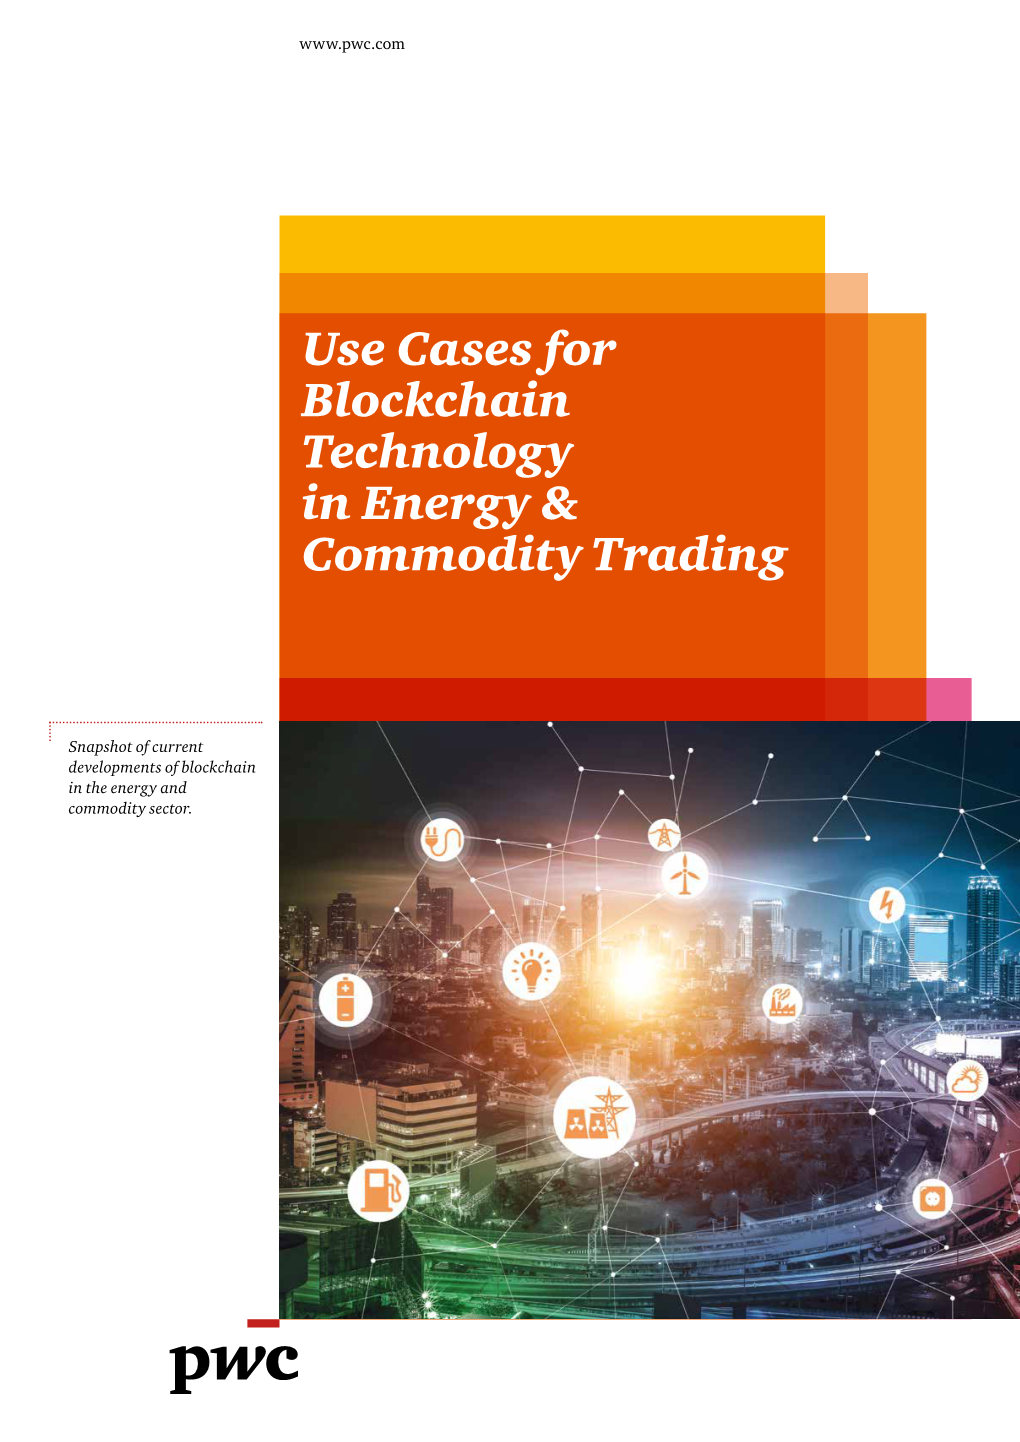 Use Cases for Blockchain Technology in Energy & Commodity Trading